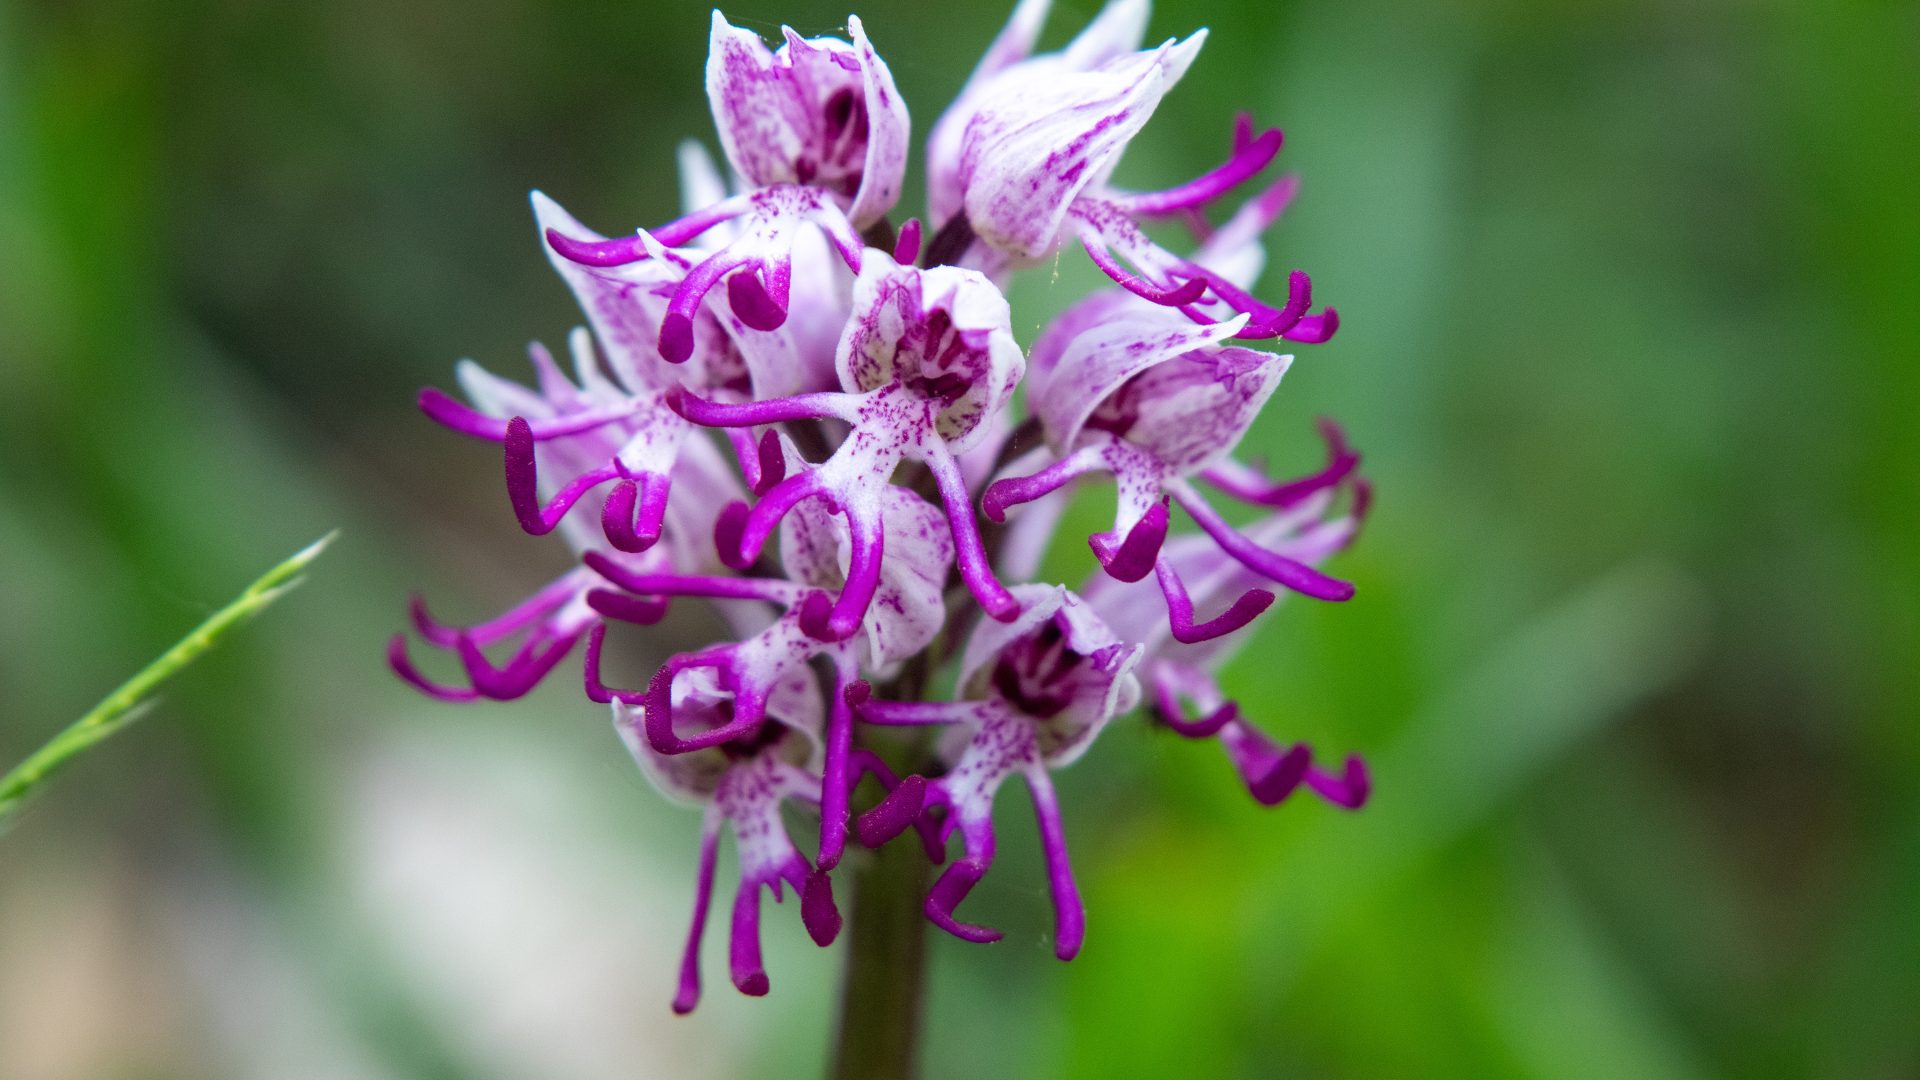 An orchid of many individual purple and white flowers, each of which bears a resemblence to the shape of a monkey.